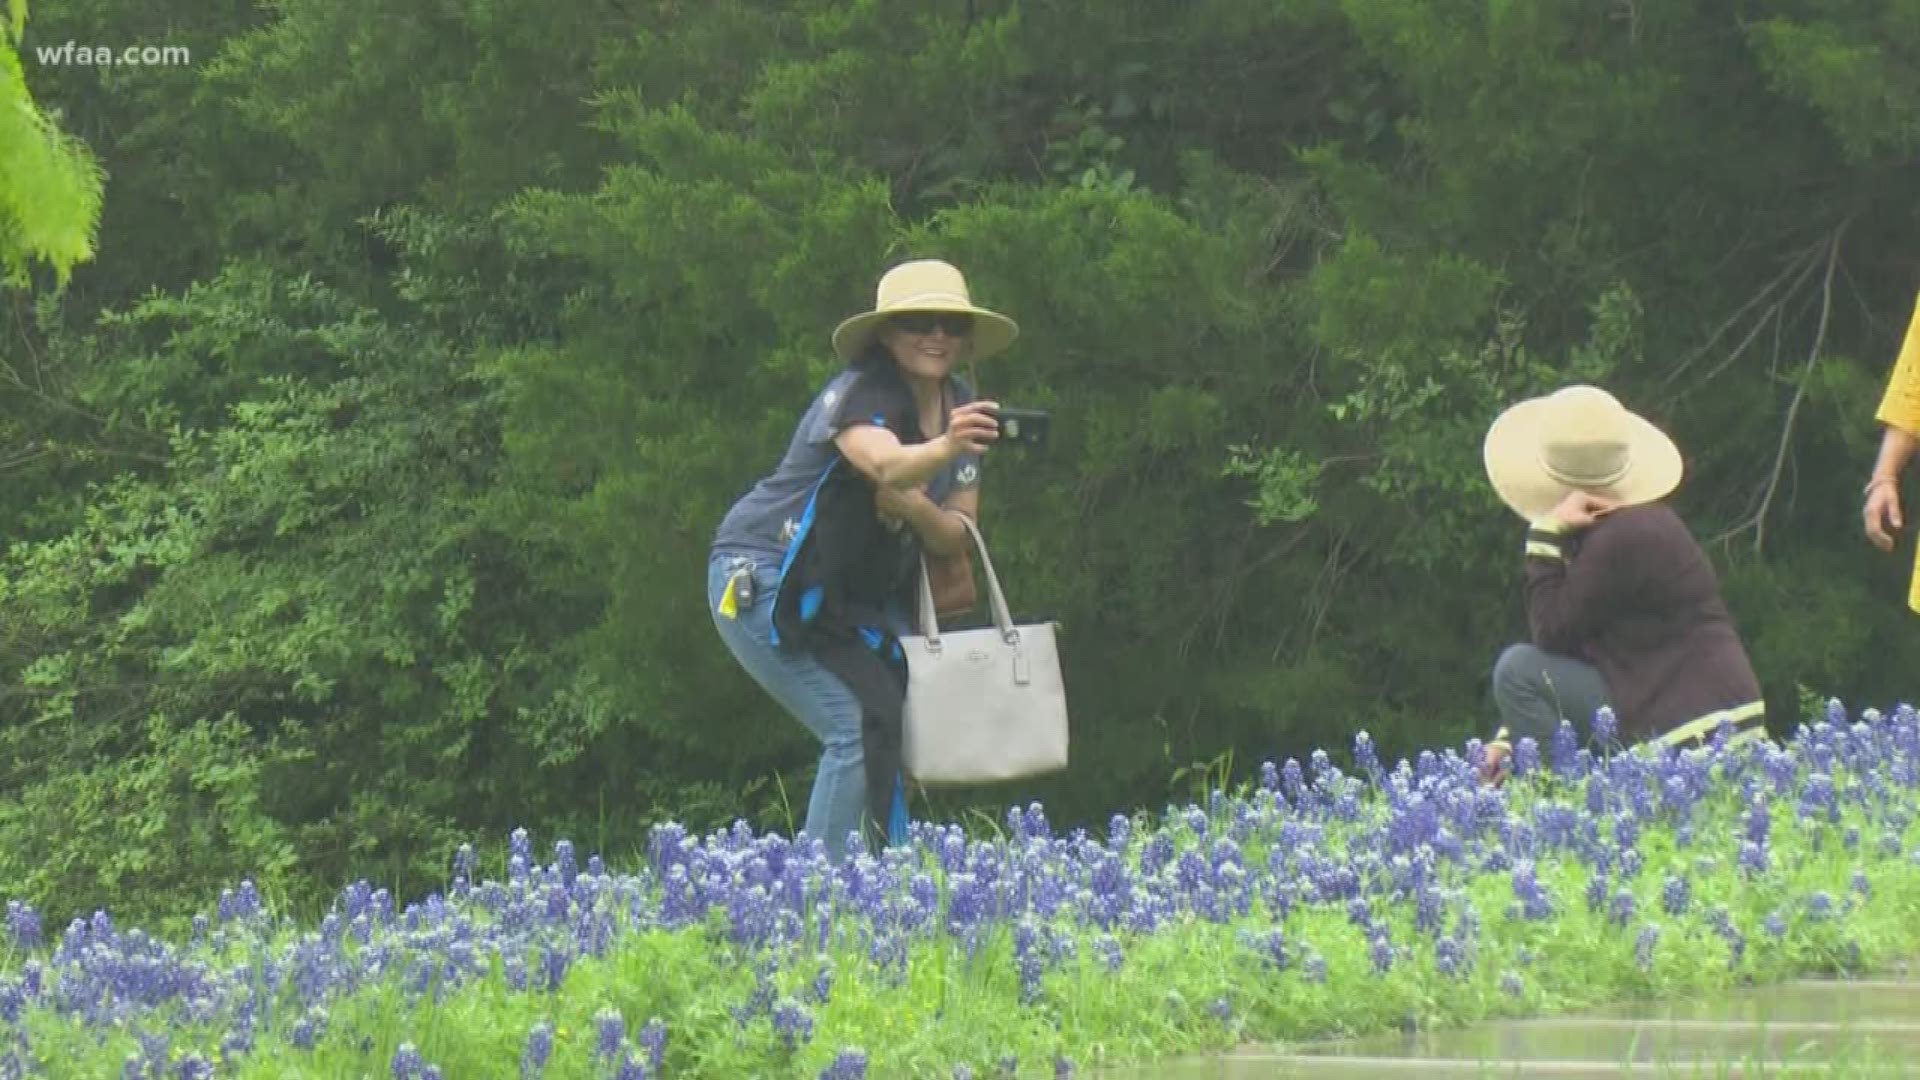 Texas bluebonnets in full bloom: Tips to take the best photos